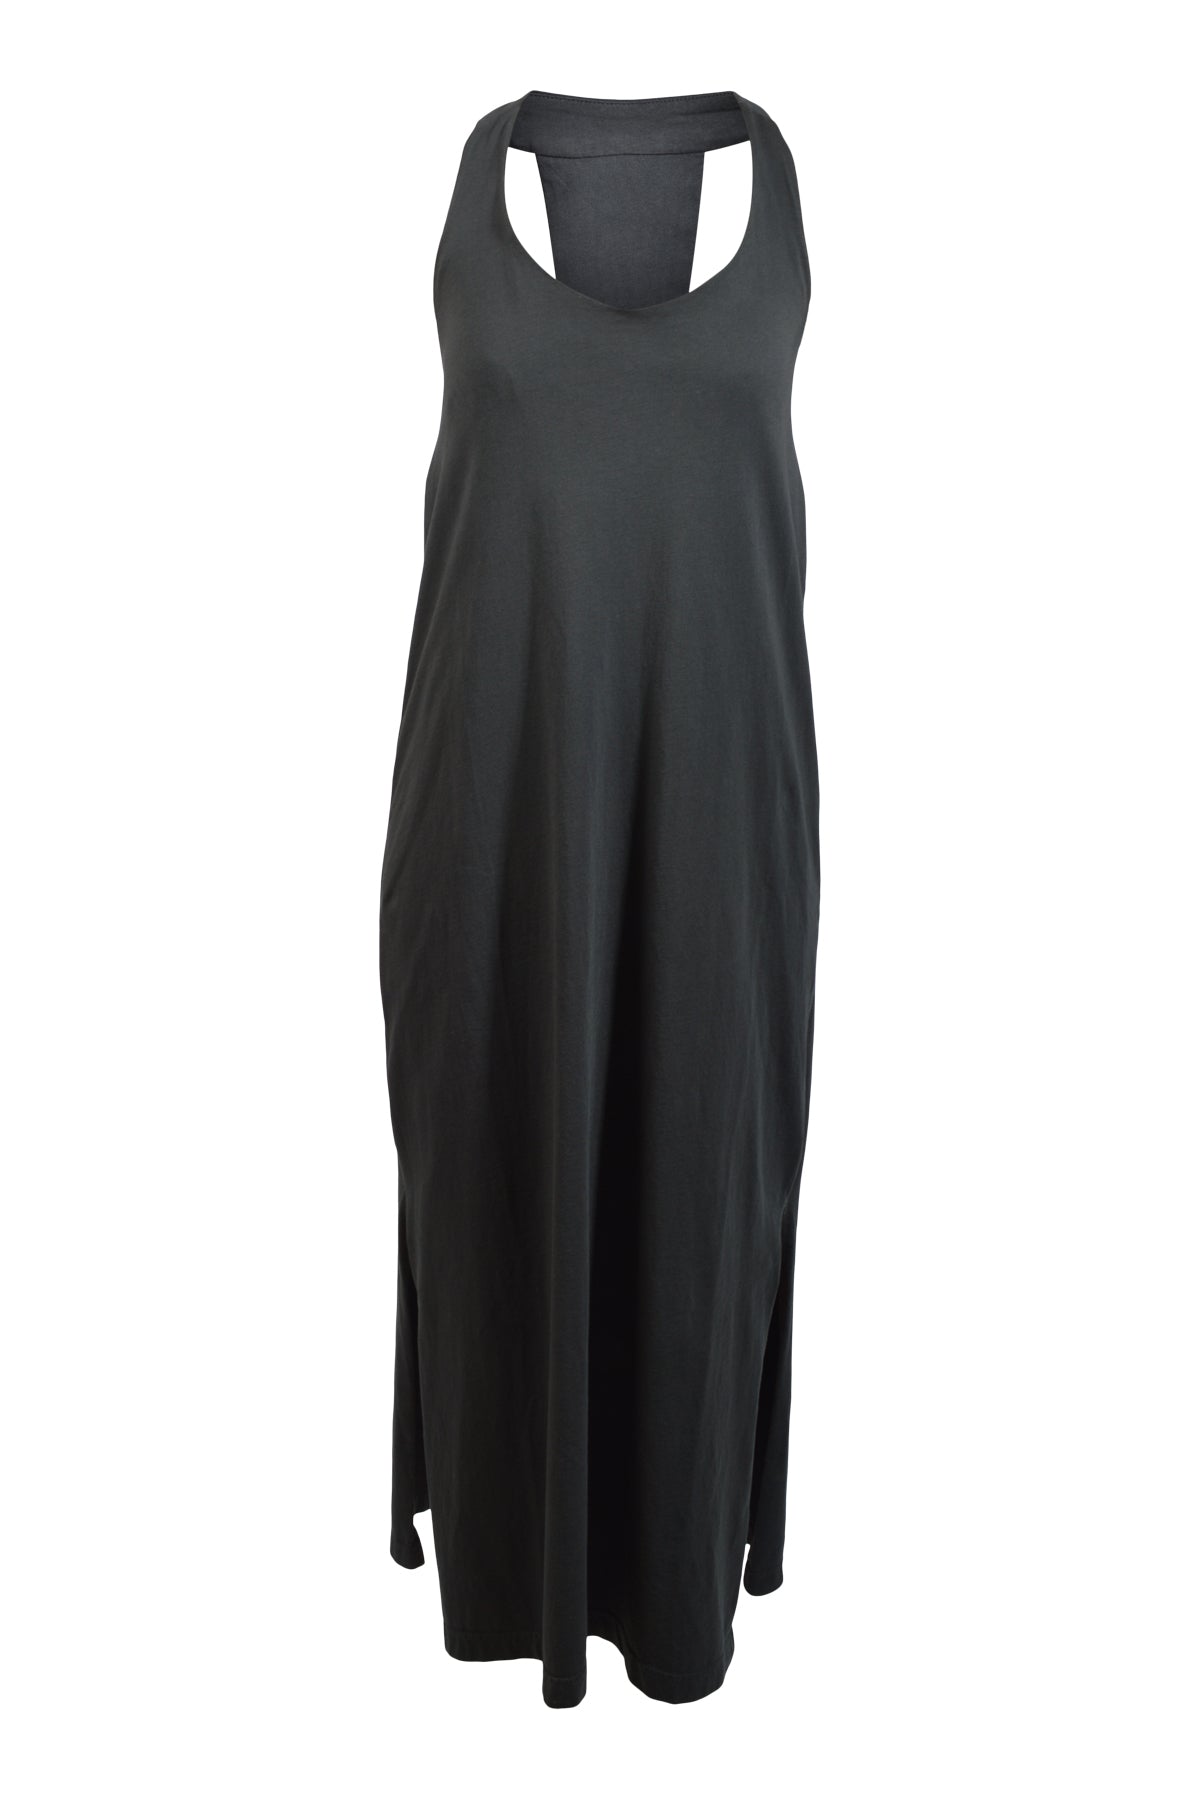 Lotus Eaters Thick dress, Anthracite